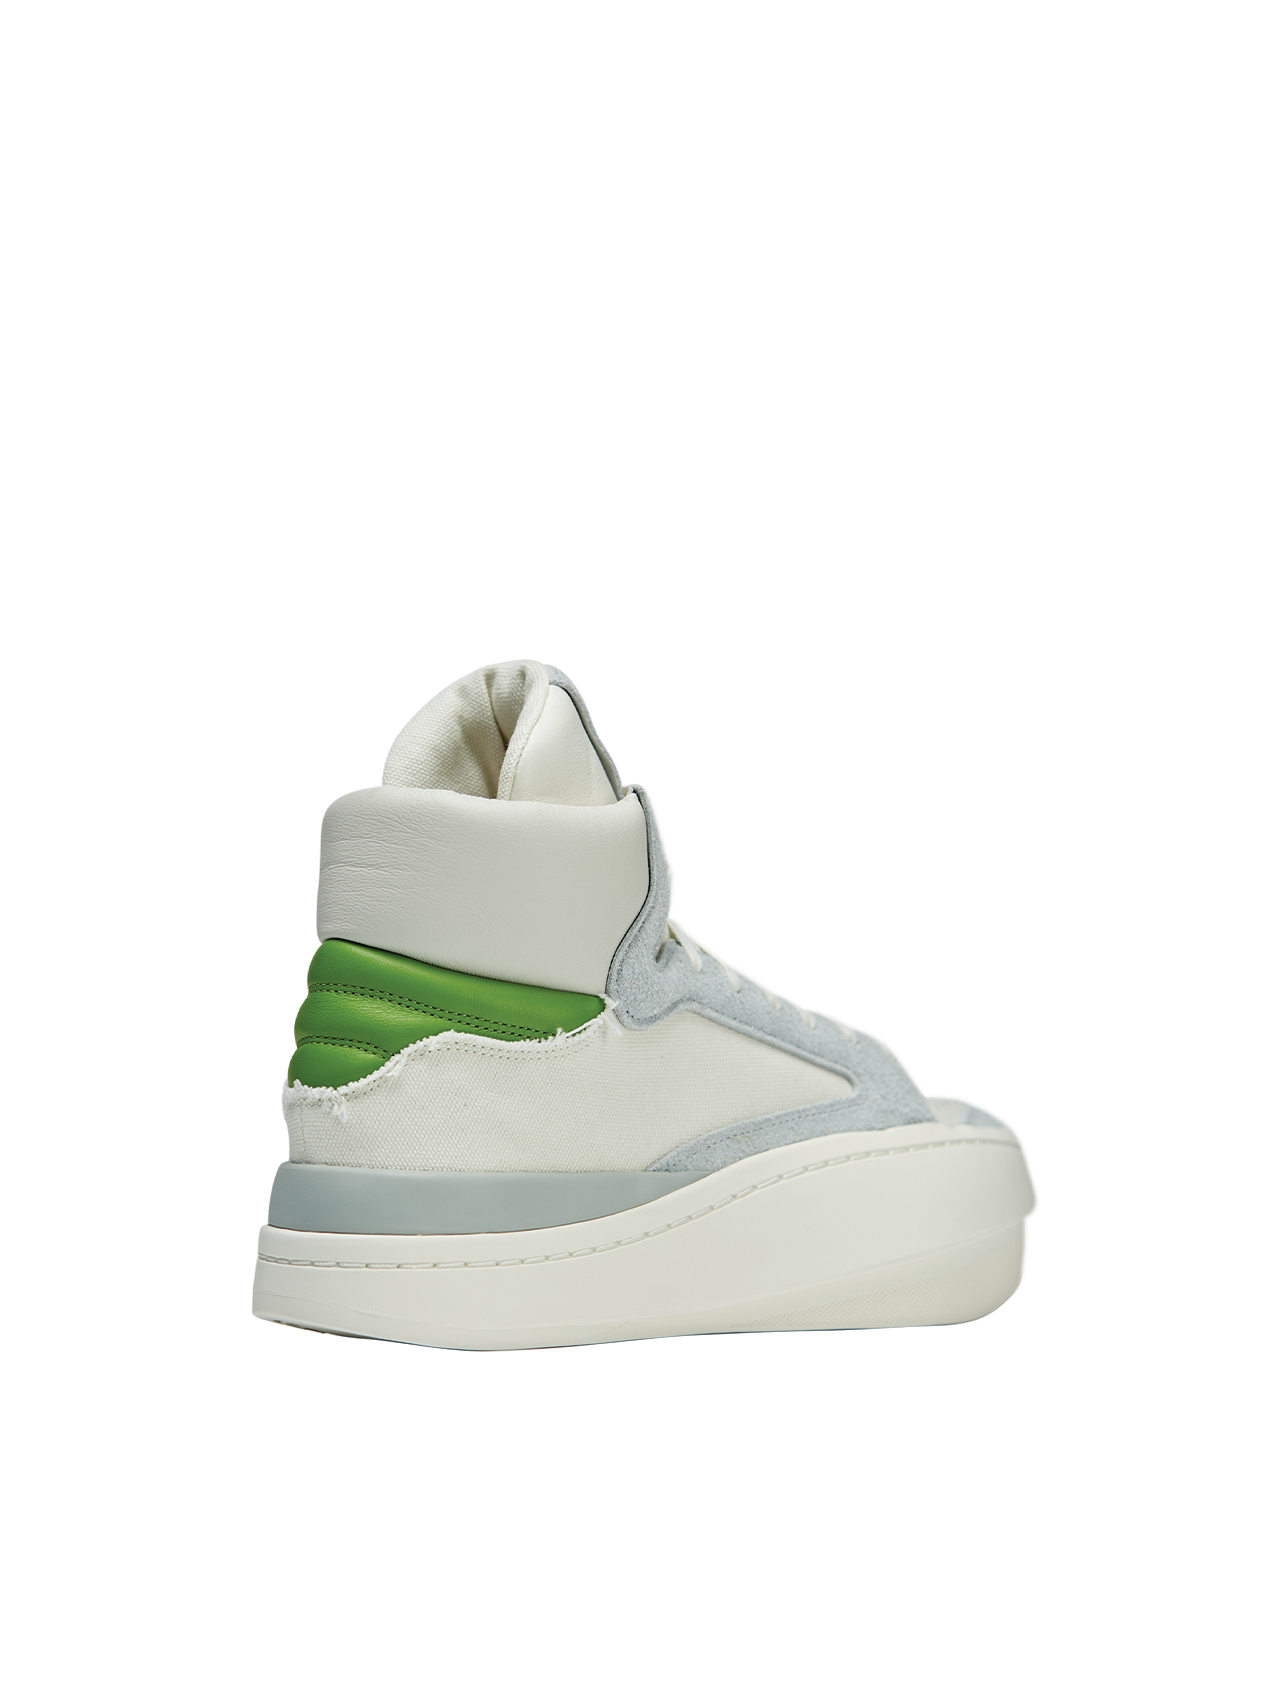 Y-3 Off White/Silver/Team Rave Green Centennial Hi Sneakers